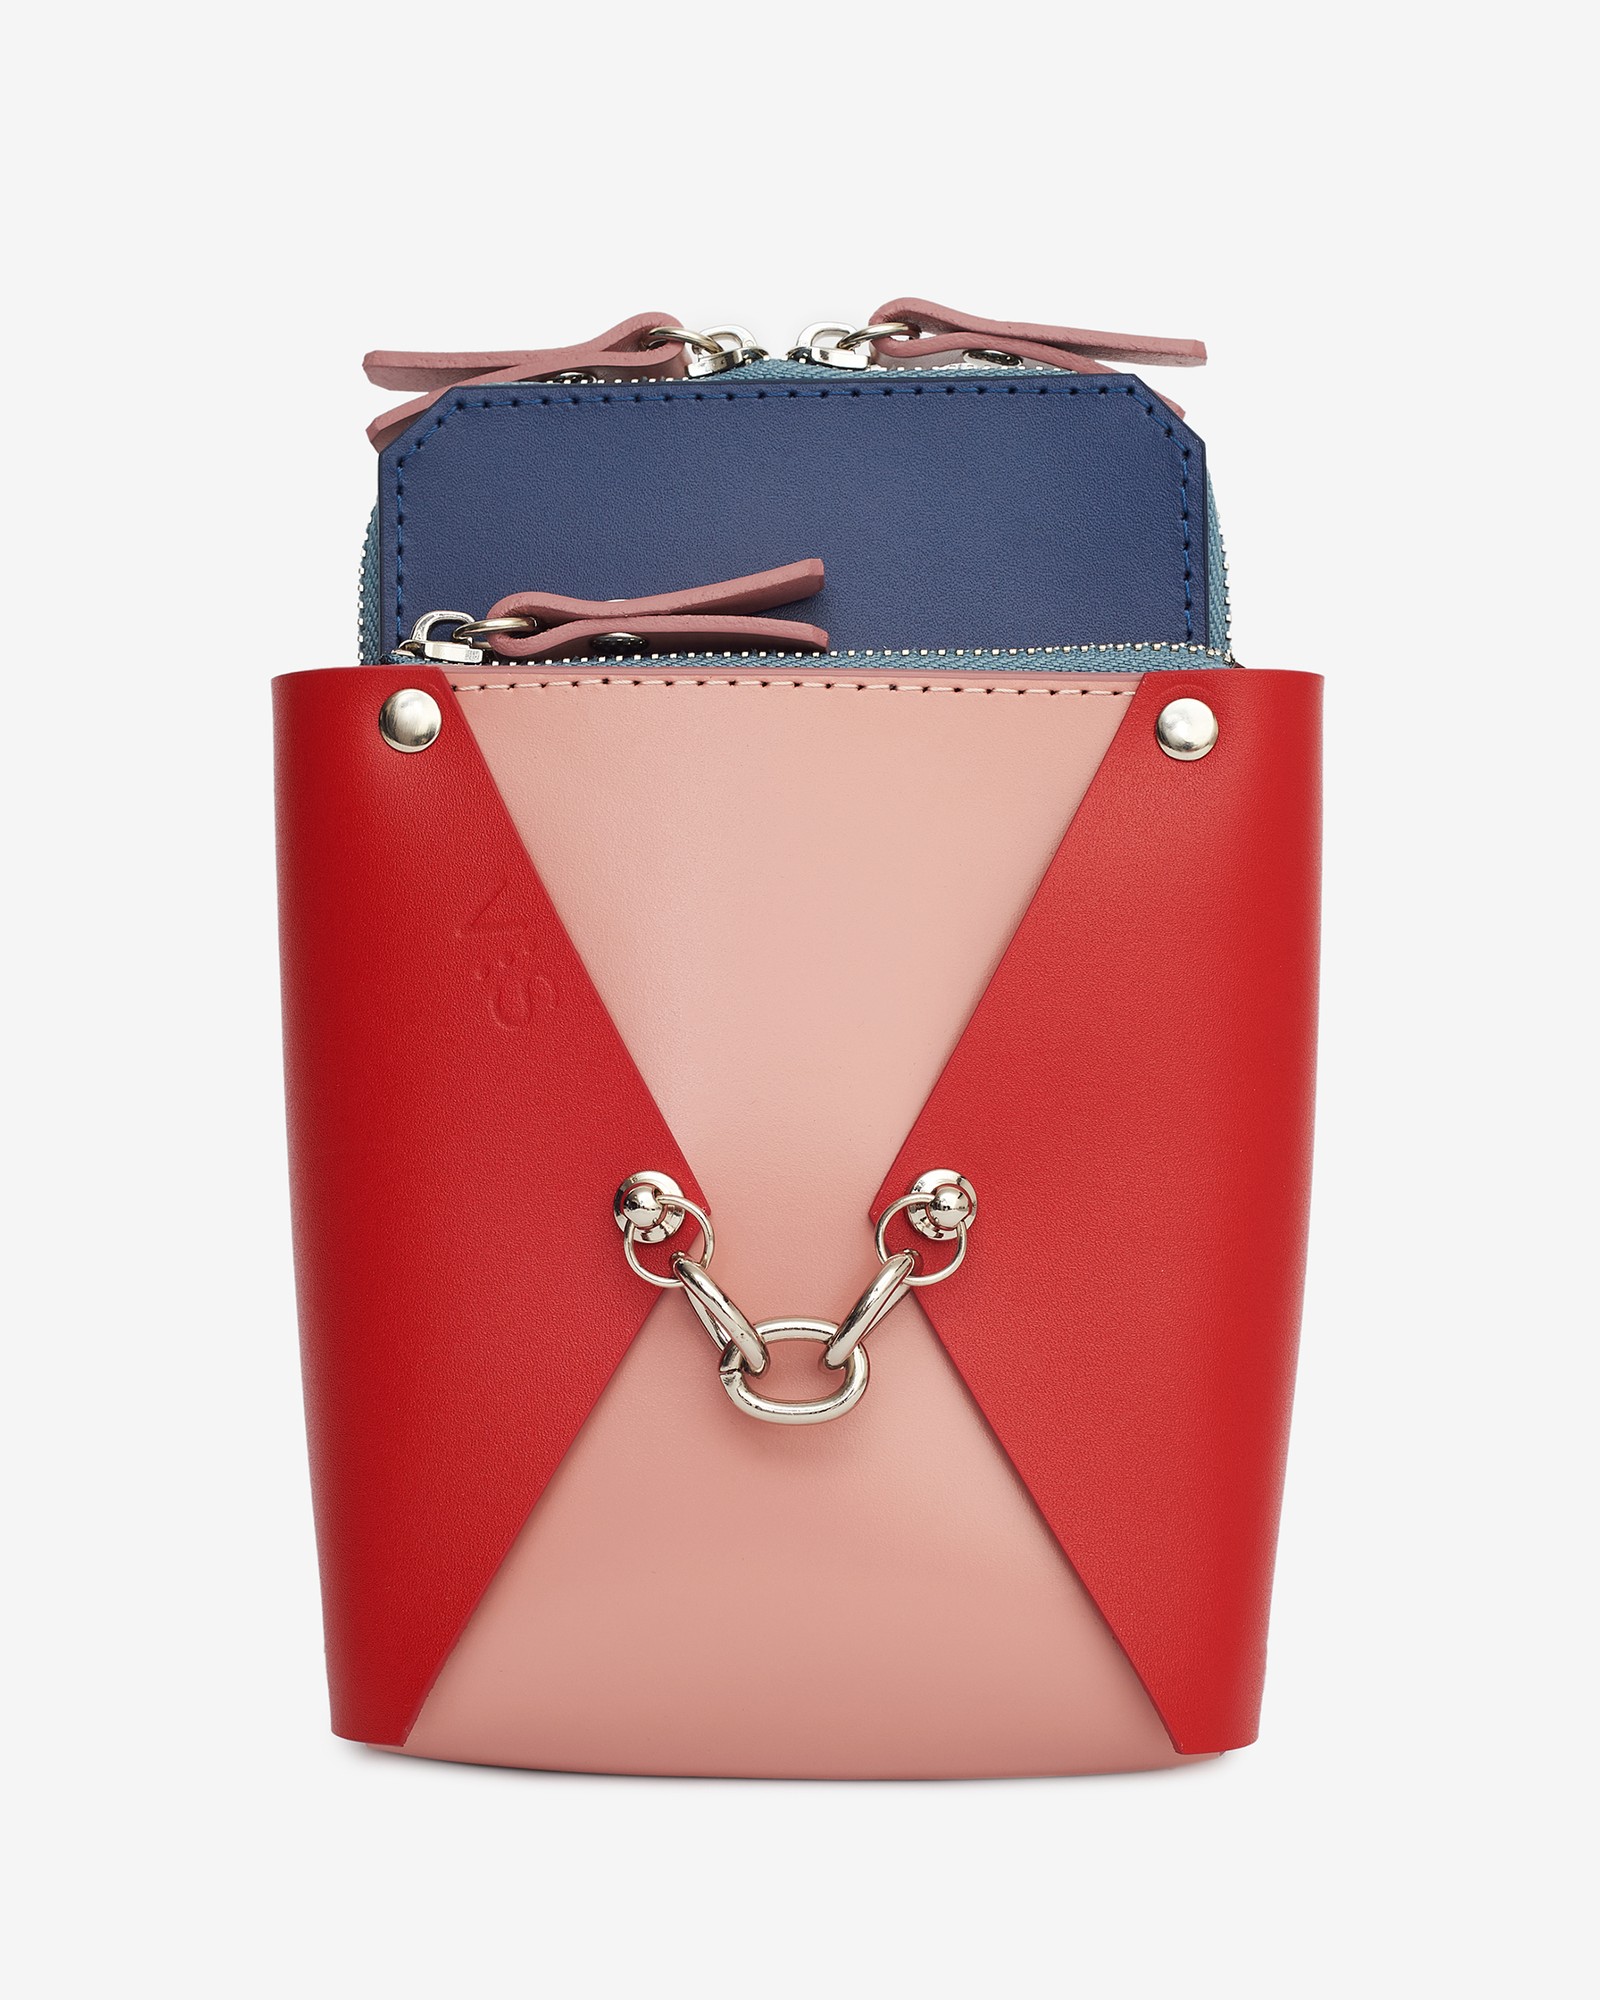 Talia leather bag in blue, red and pink color